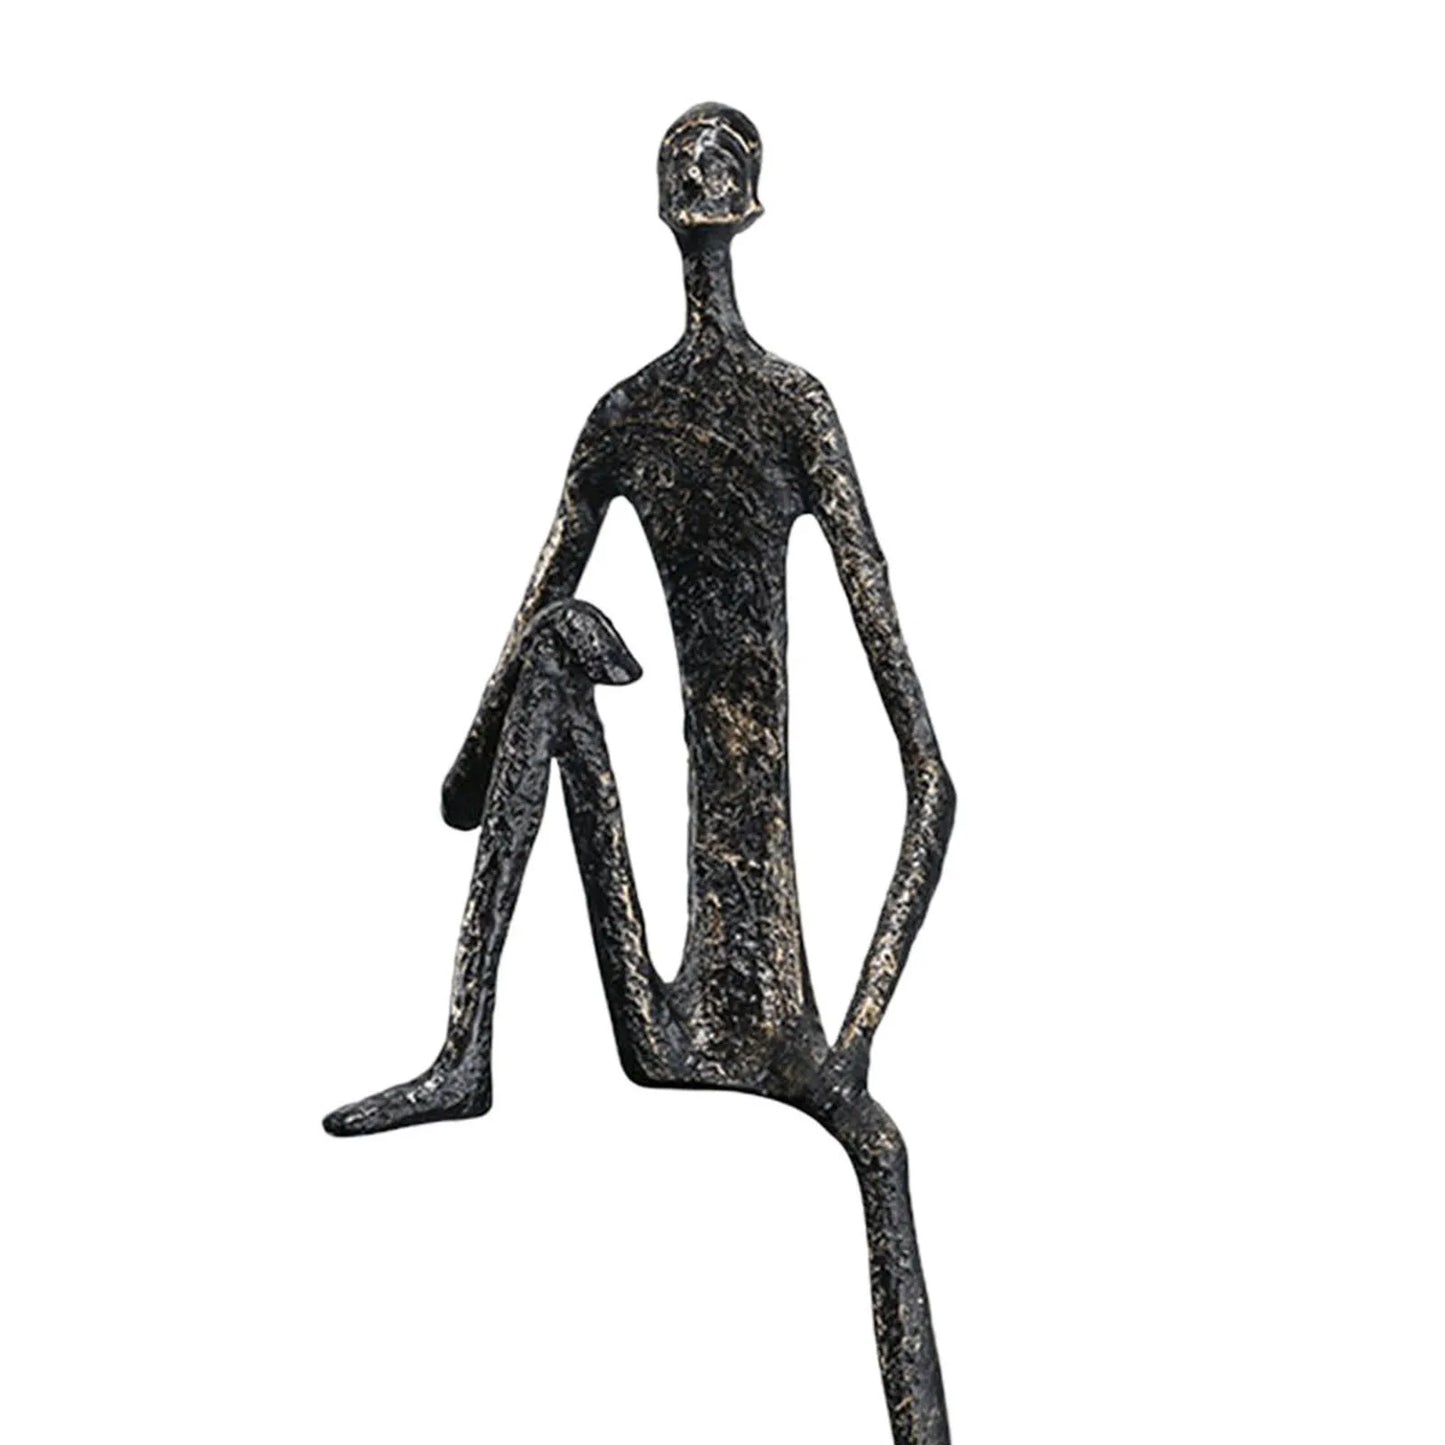 Abstract Human Figurine Metal Statue Sculpture for Table Bookshelf Christmas Home Decor Collectible Table Sculpture Decoration